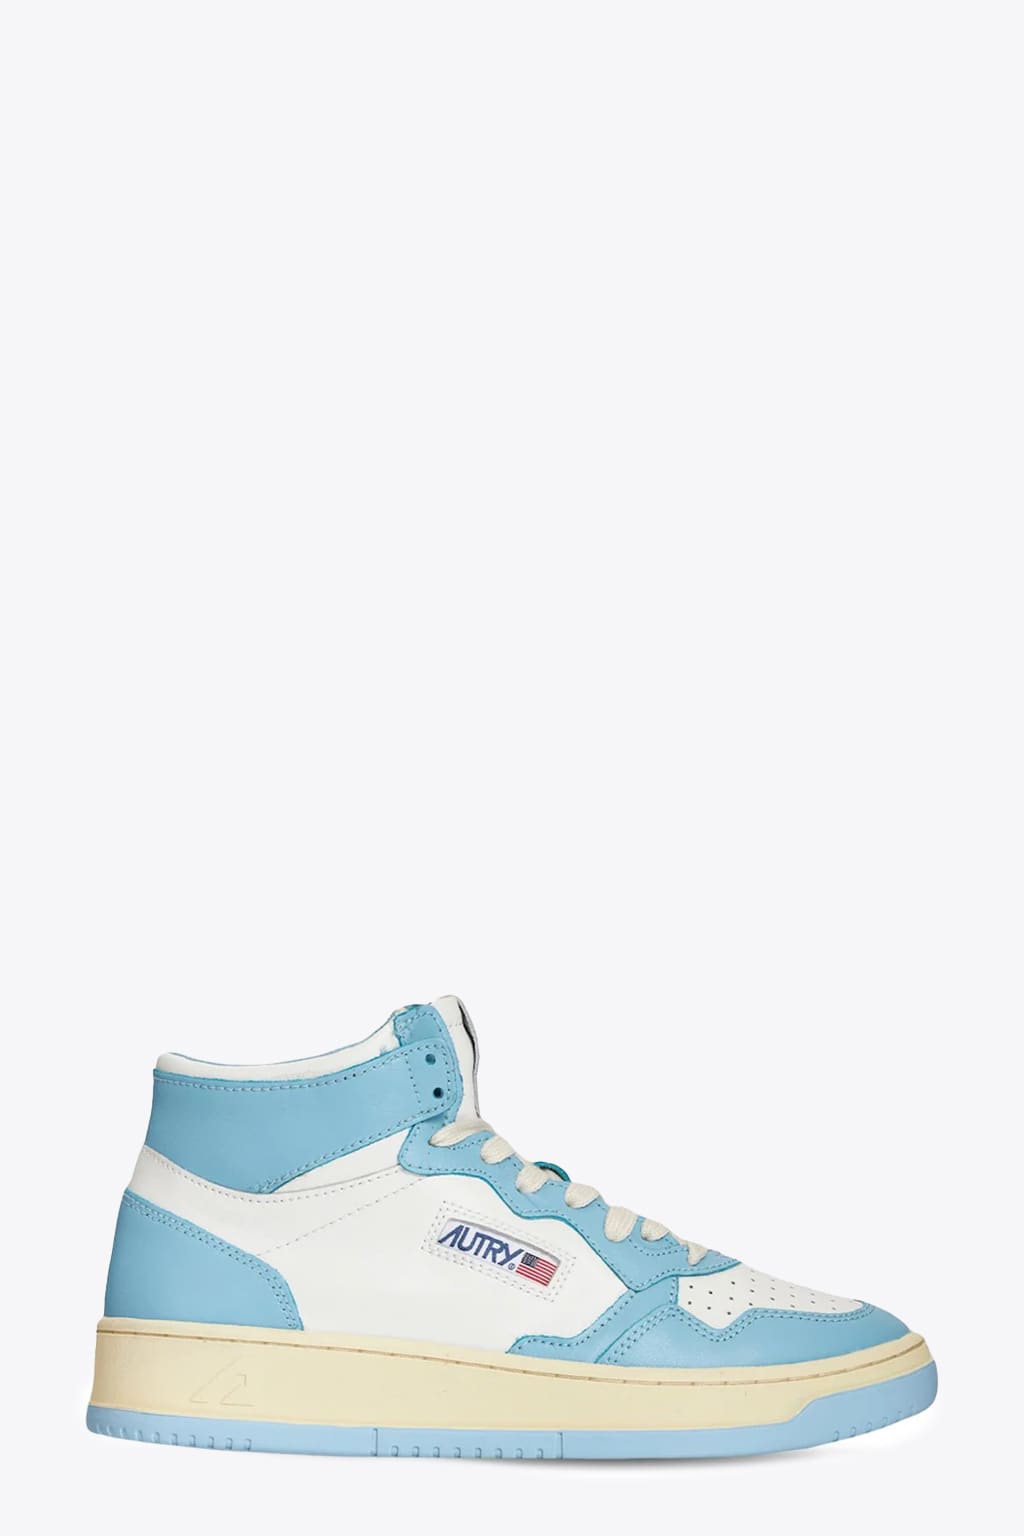 Autry 01 Mid Man Leat/leat White/light blue hi top lace up sneakers - Medalist